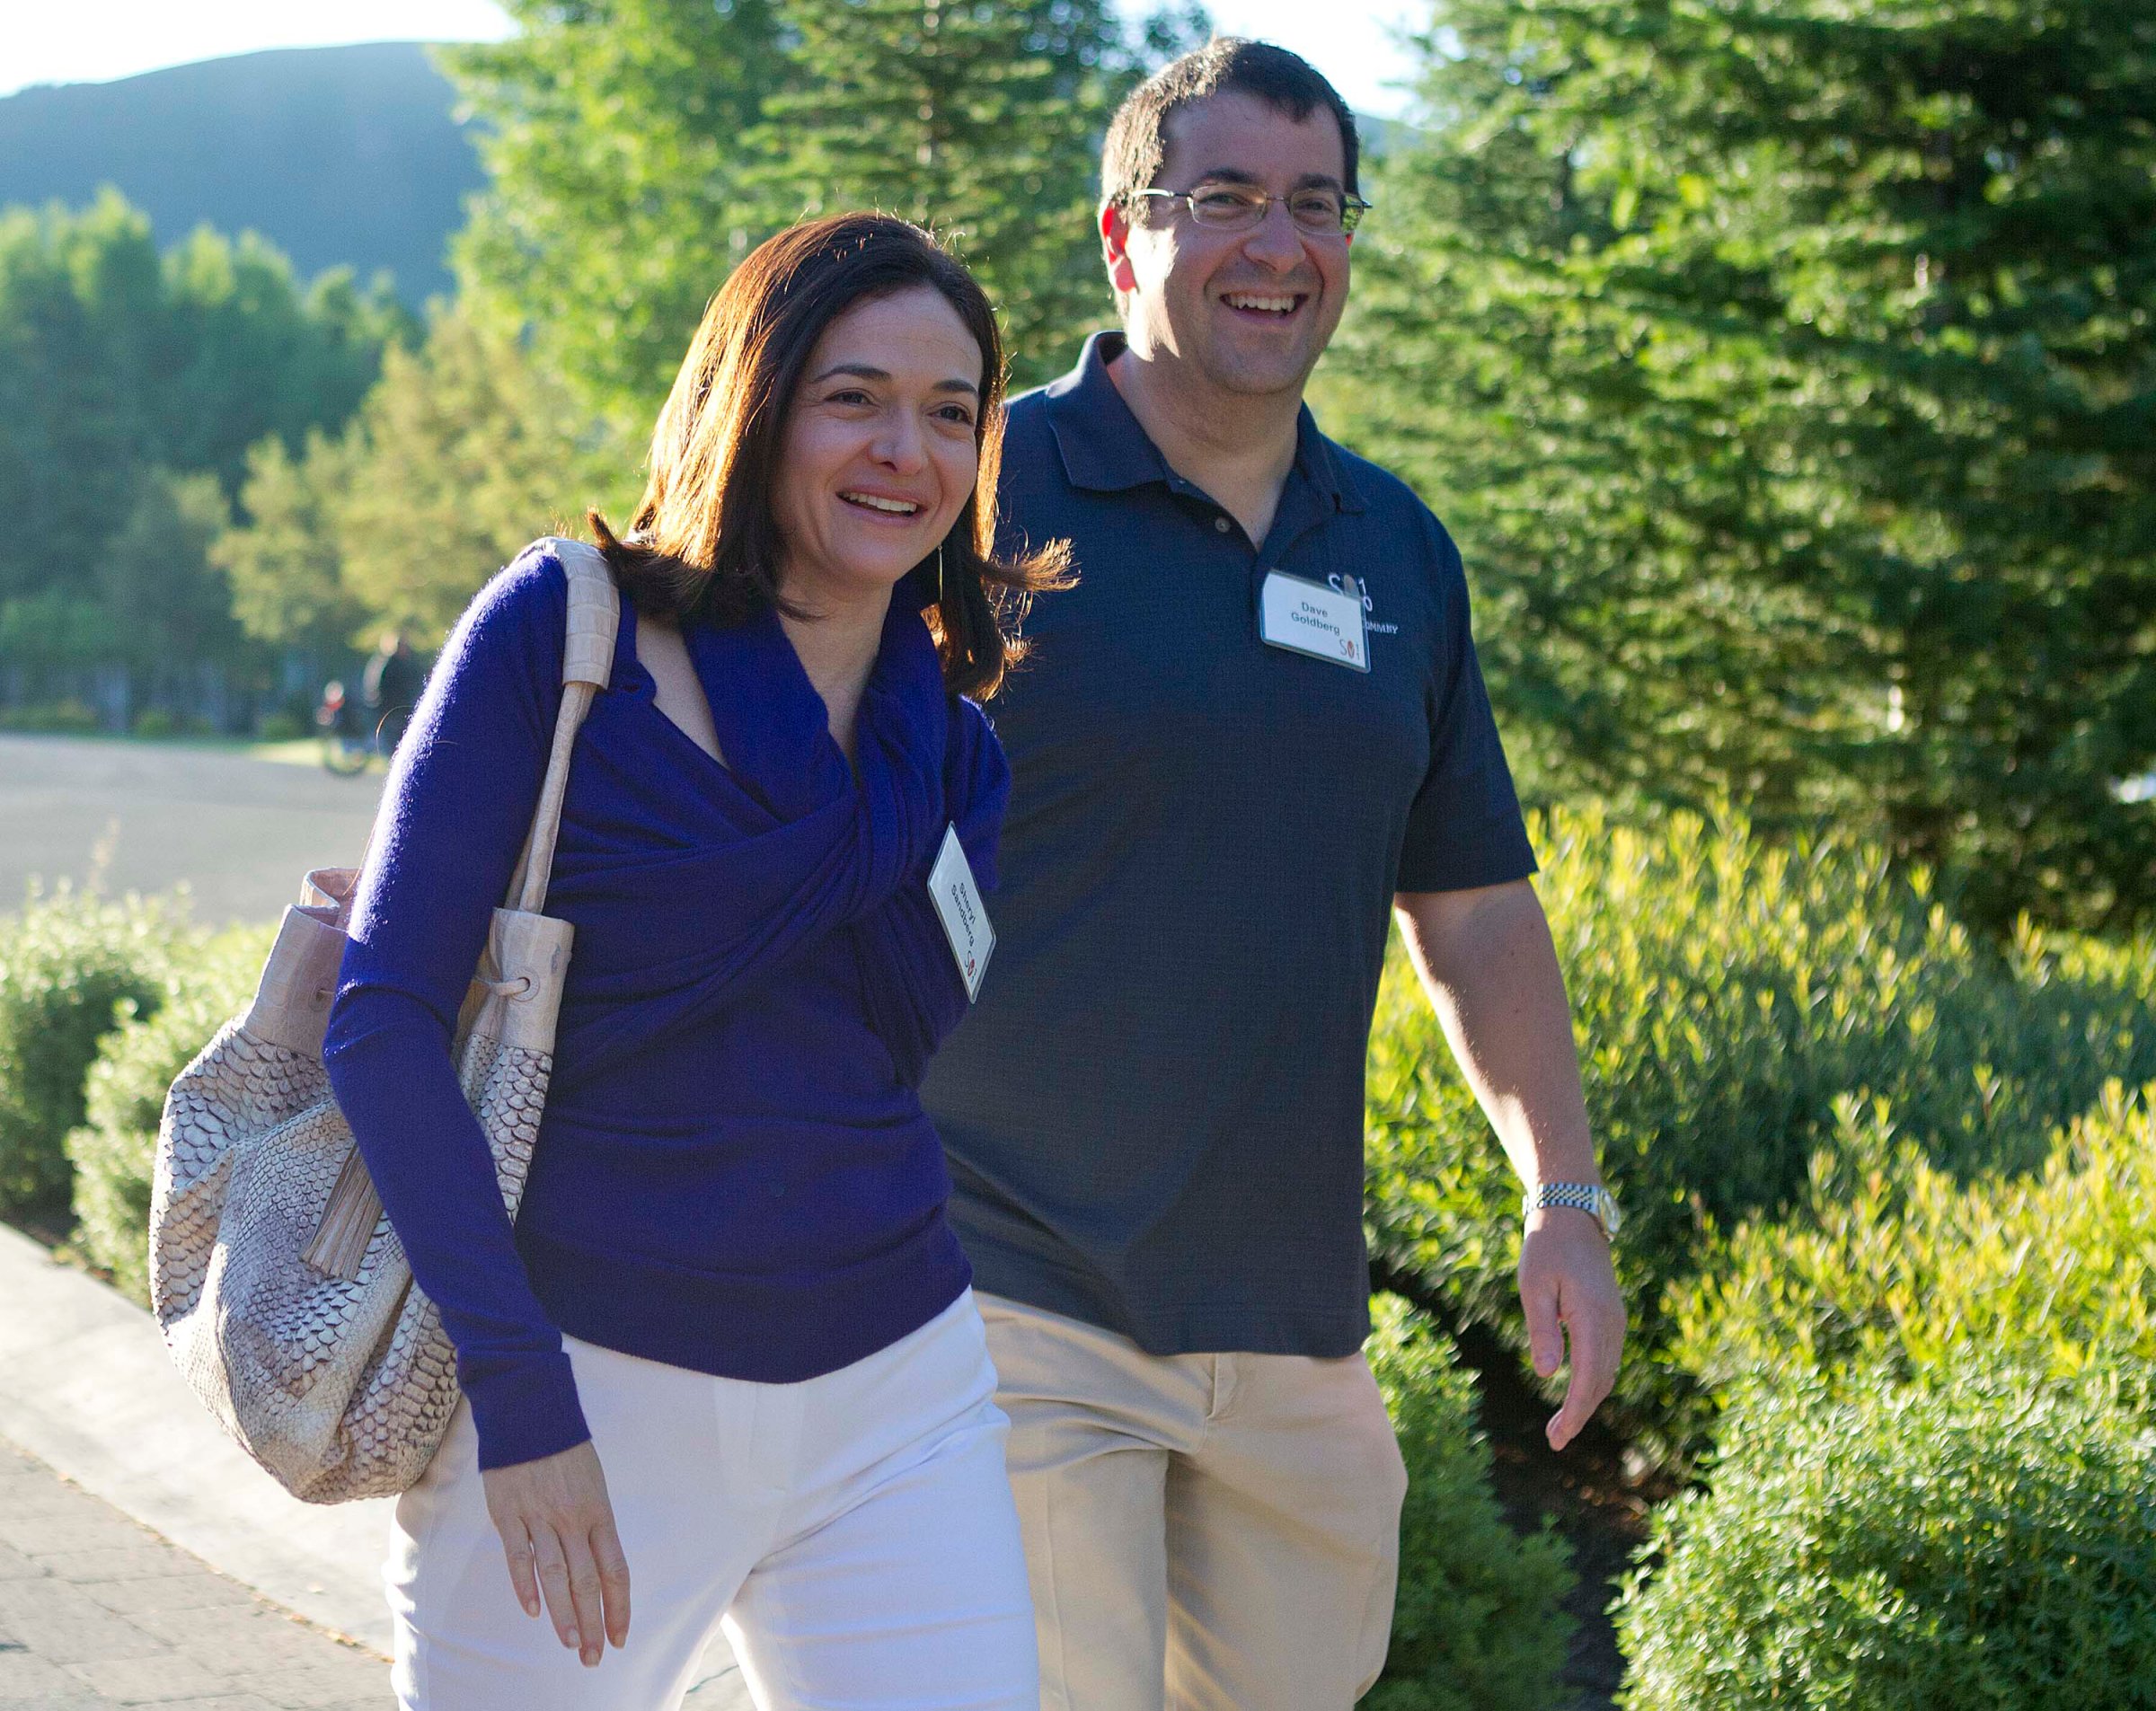 Facebook chief operating officer Sheryl Sandberg, left, and Dave Goldberg, CEO of Survey Monkey, arrive at the Sun Valley Inn for the 2011 Allen and Co. Sun Valley Conference, on July 6, 2011, in Sun Valley, Idaho.